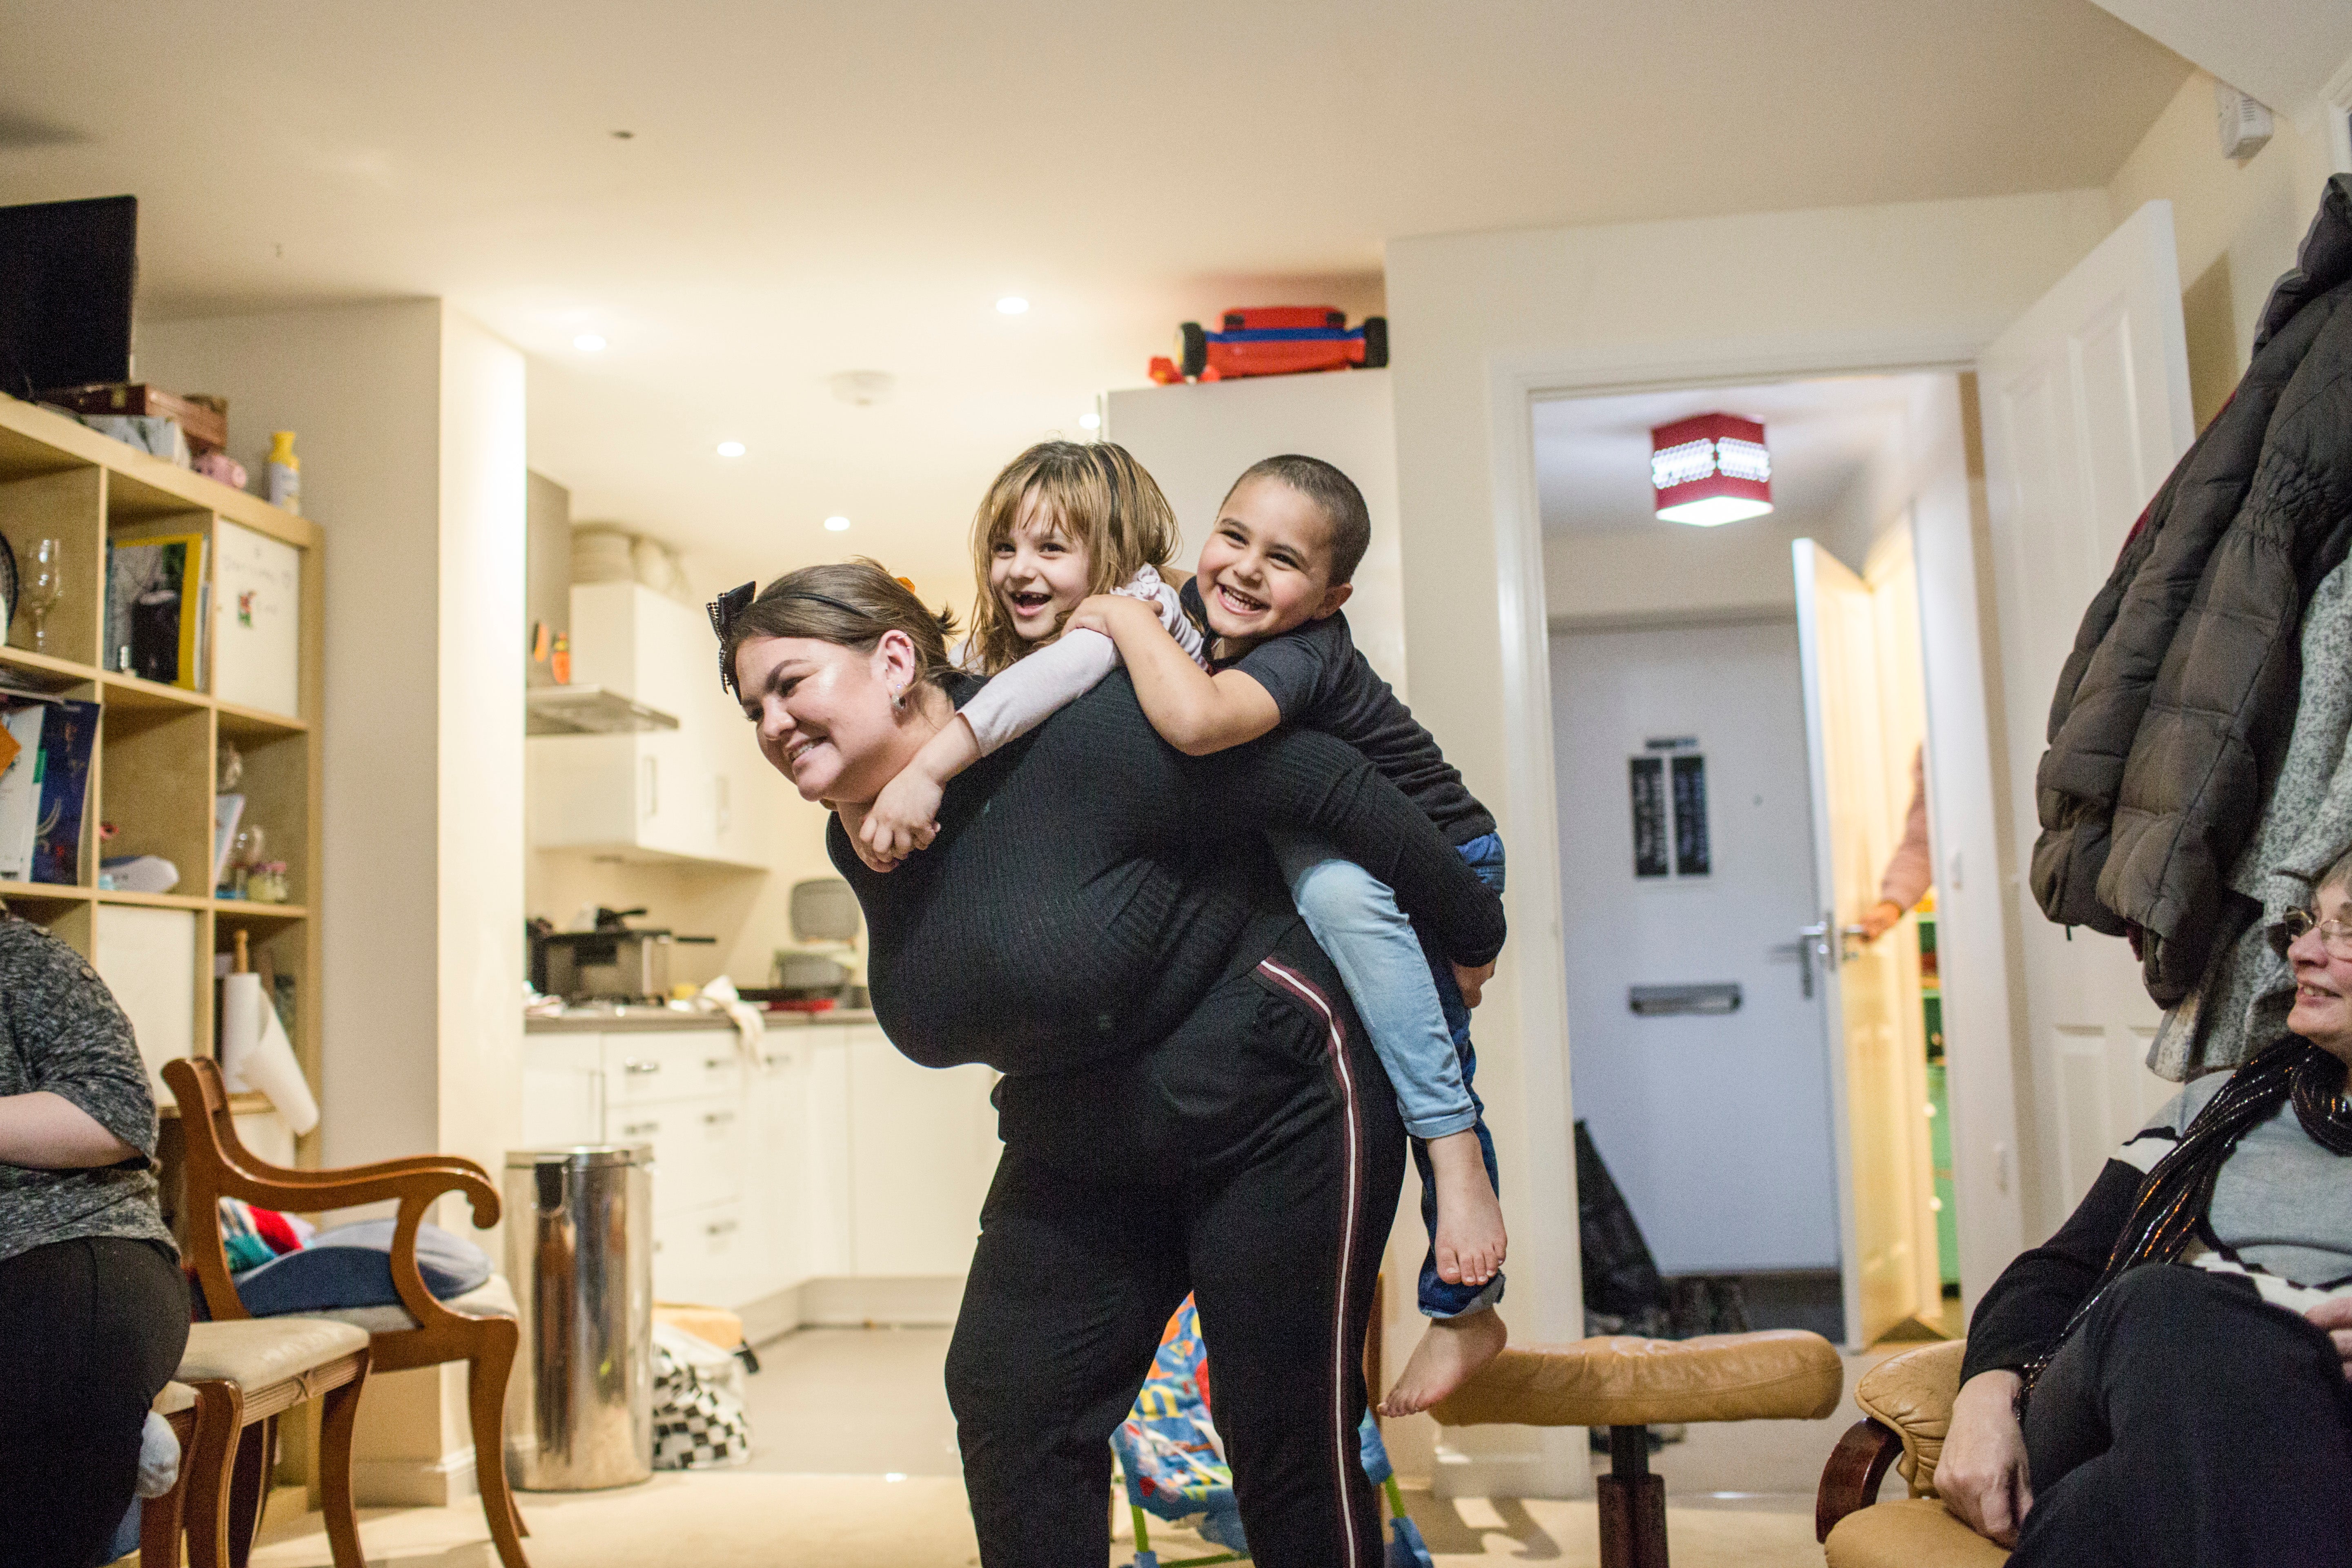 Amy Chapman plays with Adbul, 4, and Noor, 6, at the Arnout family home in Devon